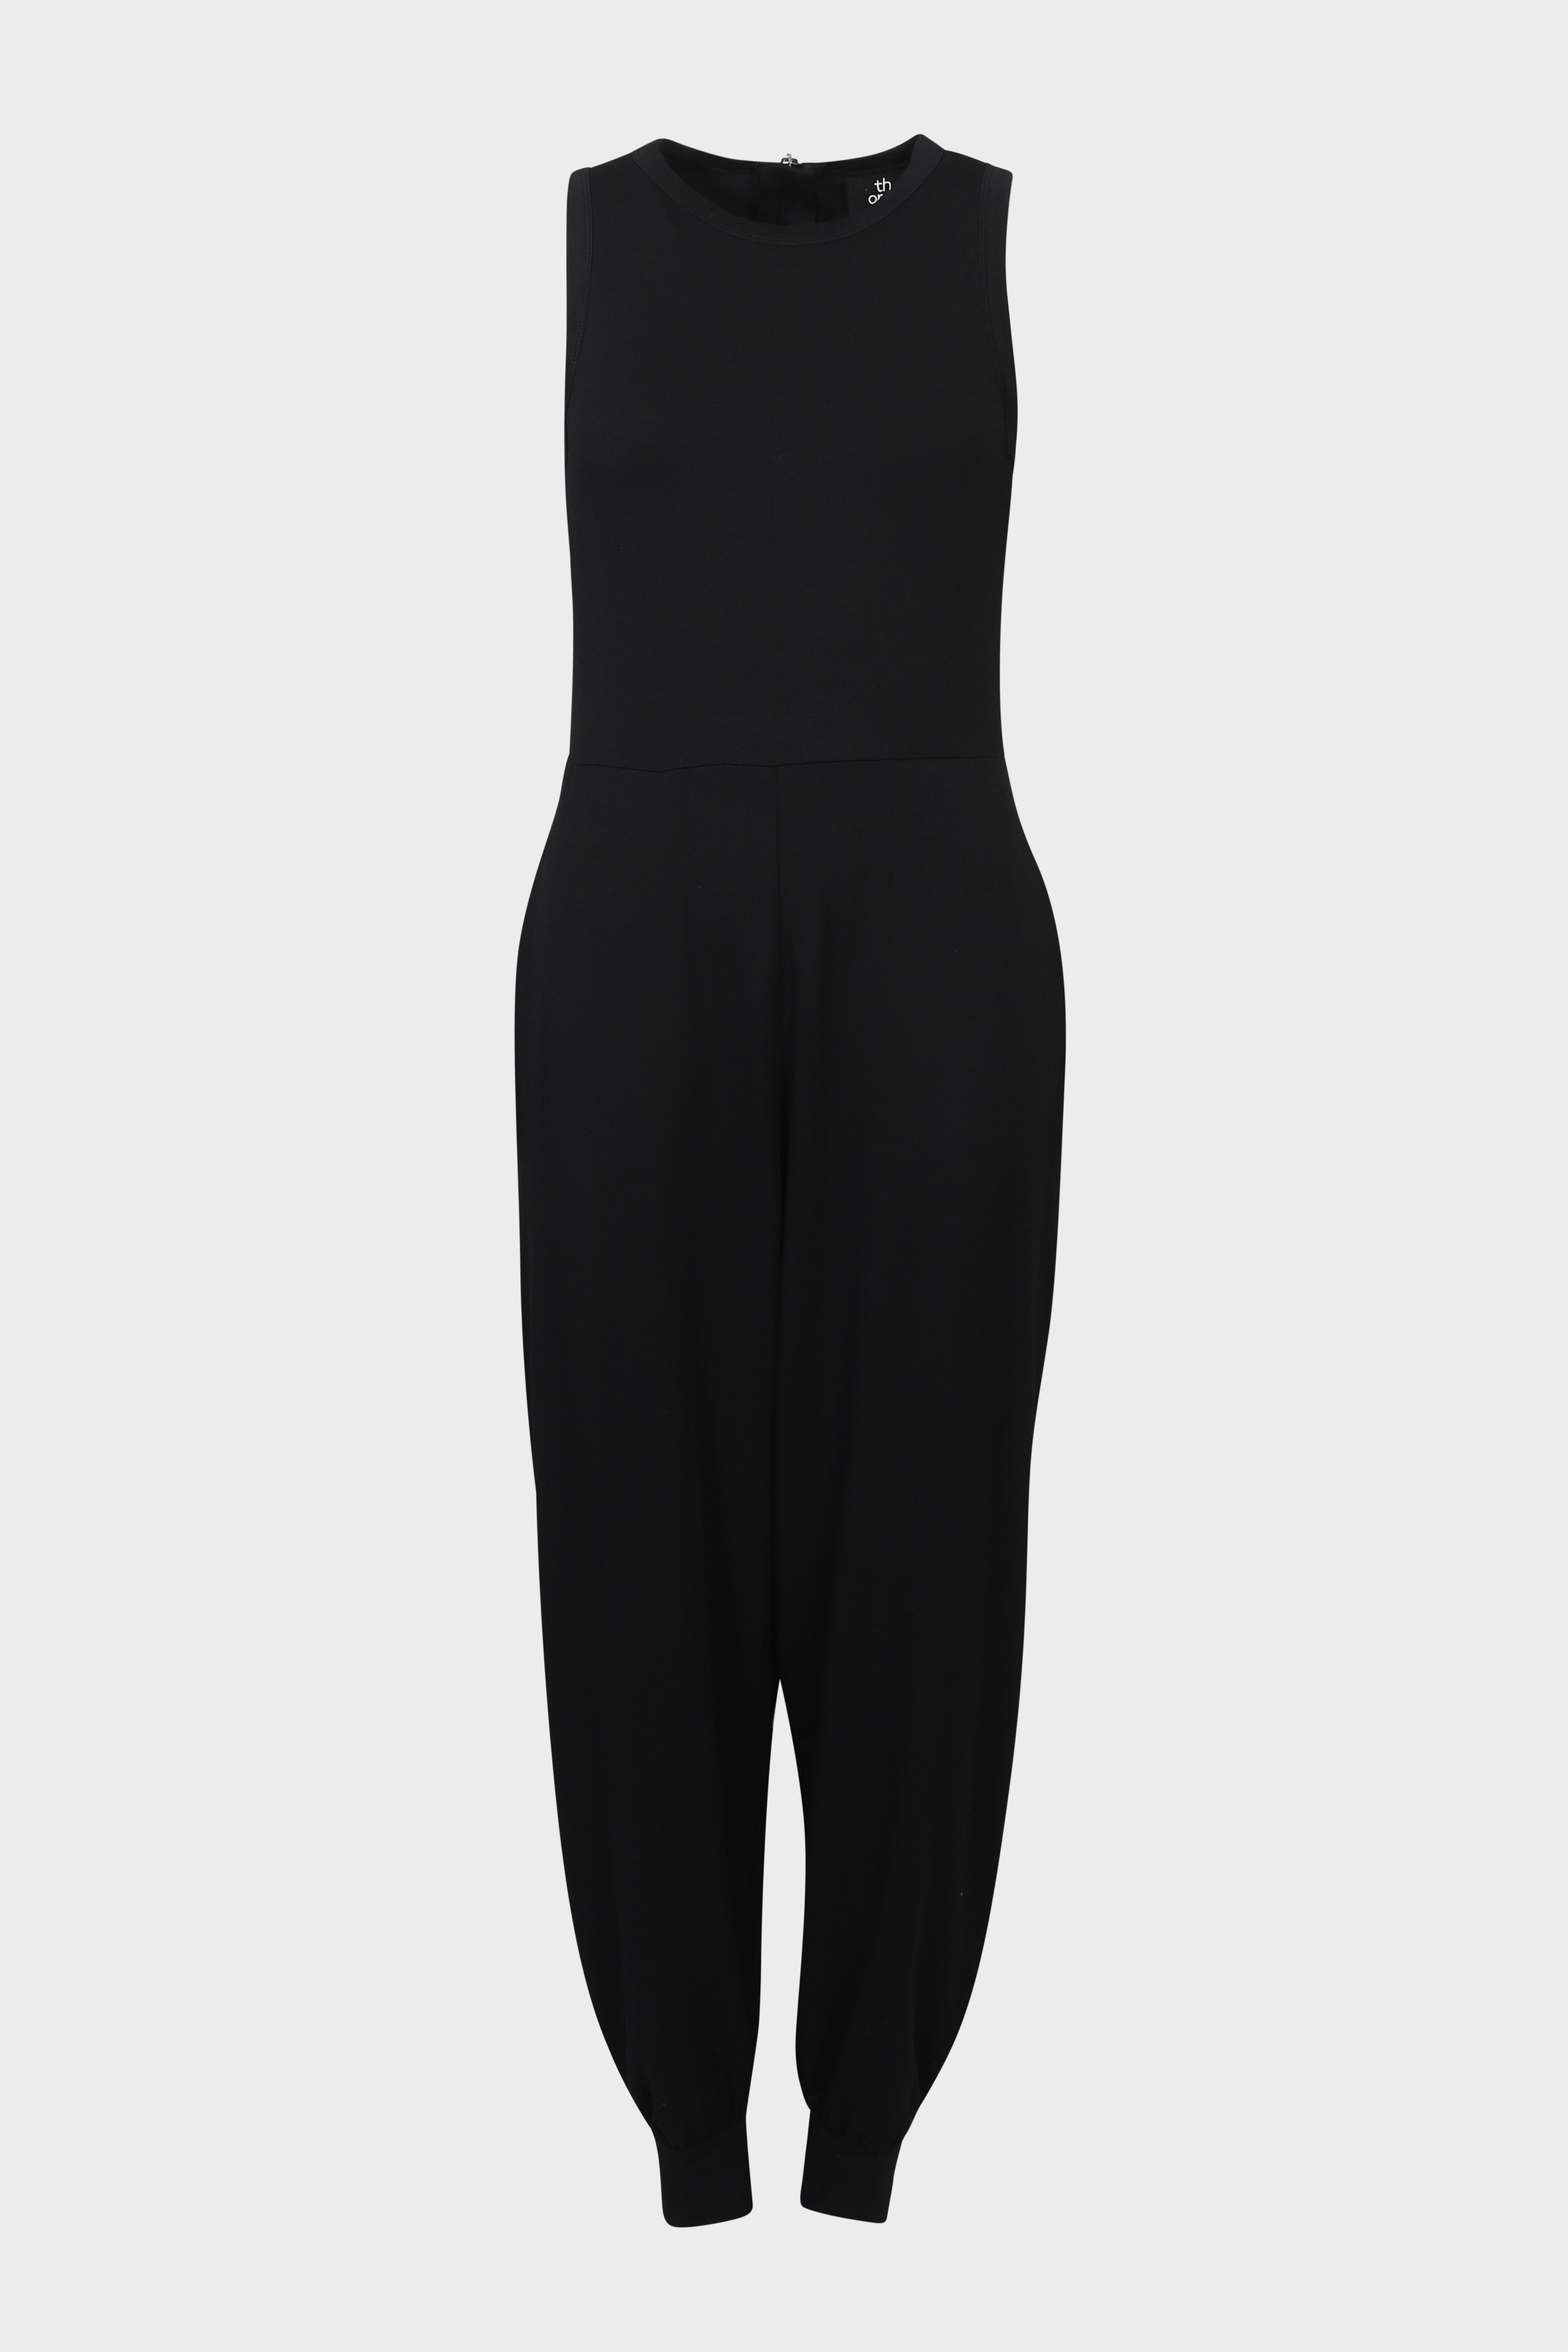 THOM KROM Overall in Black M